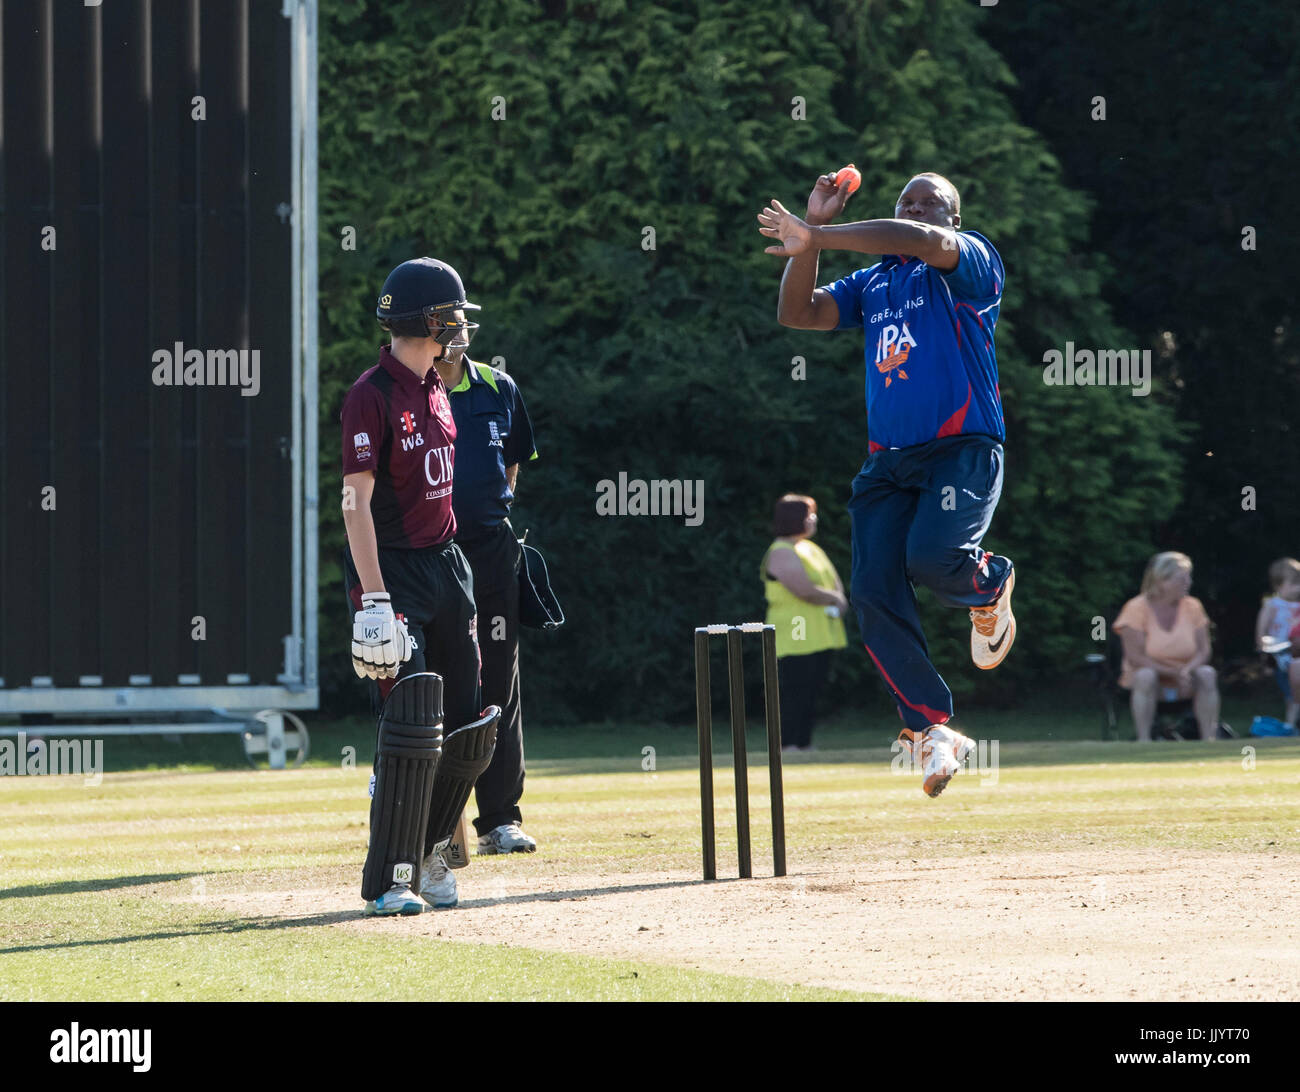 Brentwood, Essex 21st July 2017,Devon Malcolm at playing for the PCA English Masters, at Brentwood for the match against Brentwood Cricket Club Credit: Ian Davidson/Alamy Live News Stock Photo